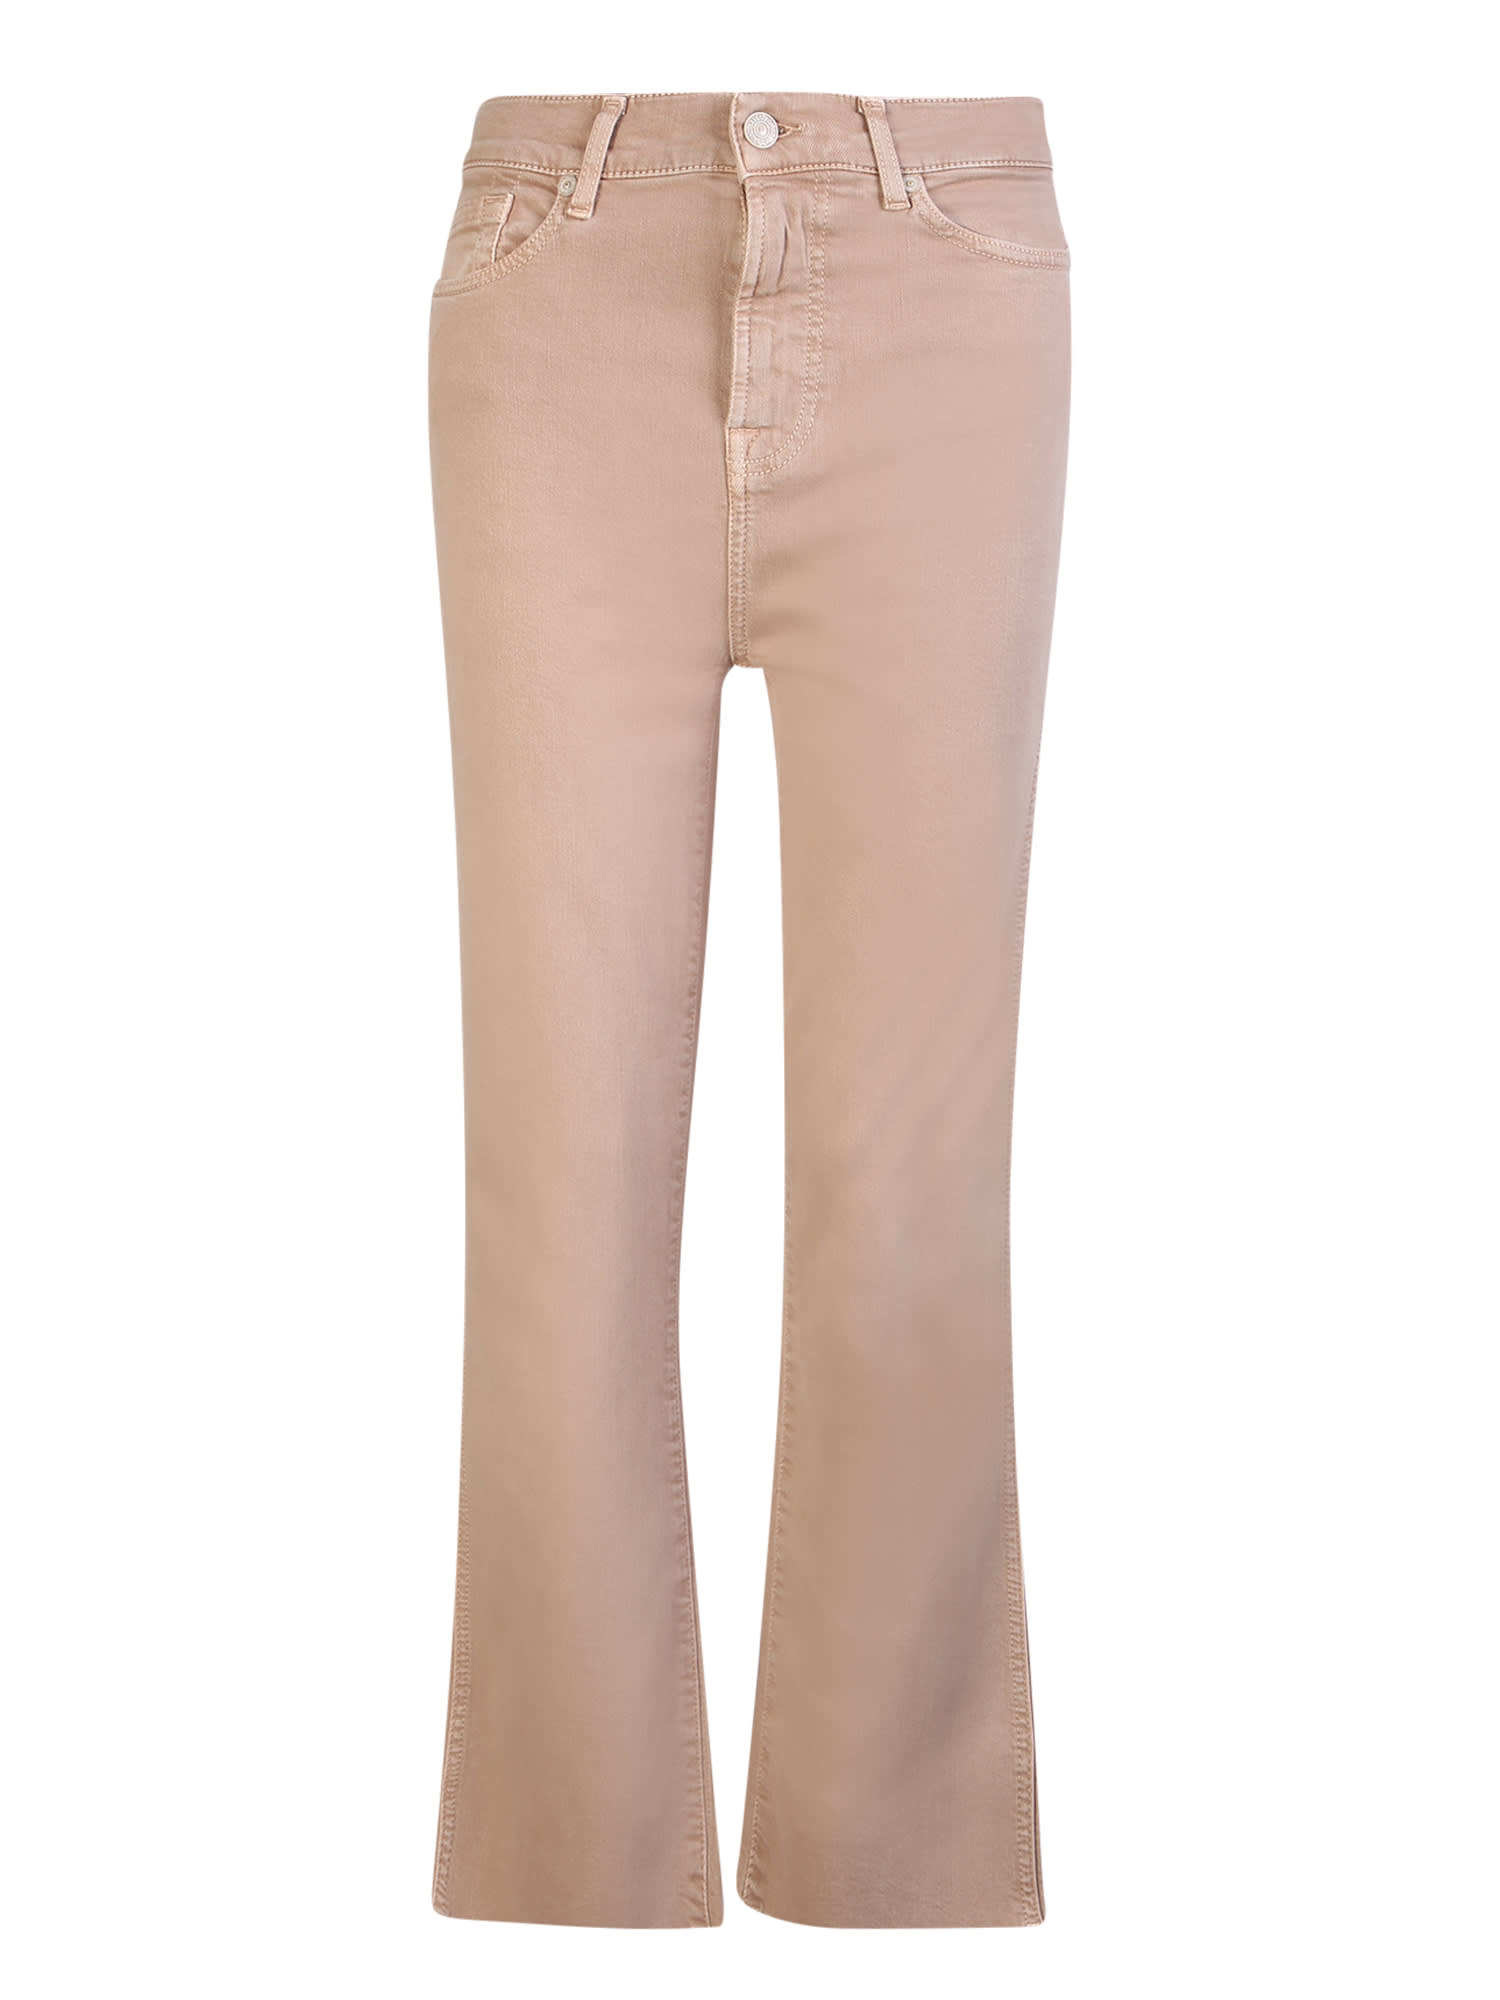 7 FOR ALL MANKIND SLIM KICK BEIGE JEANS